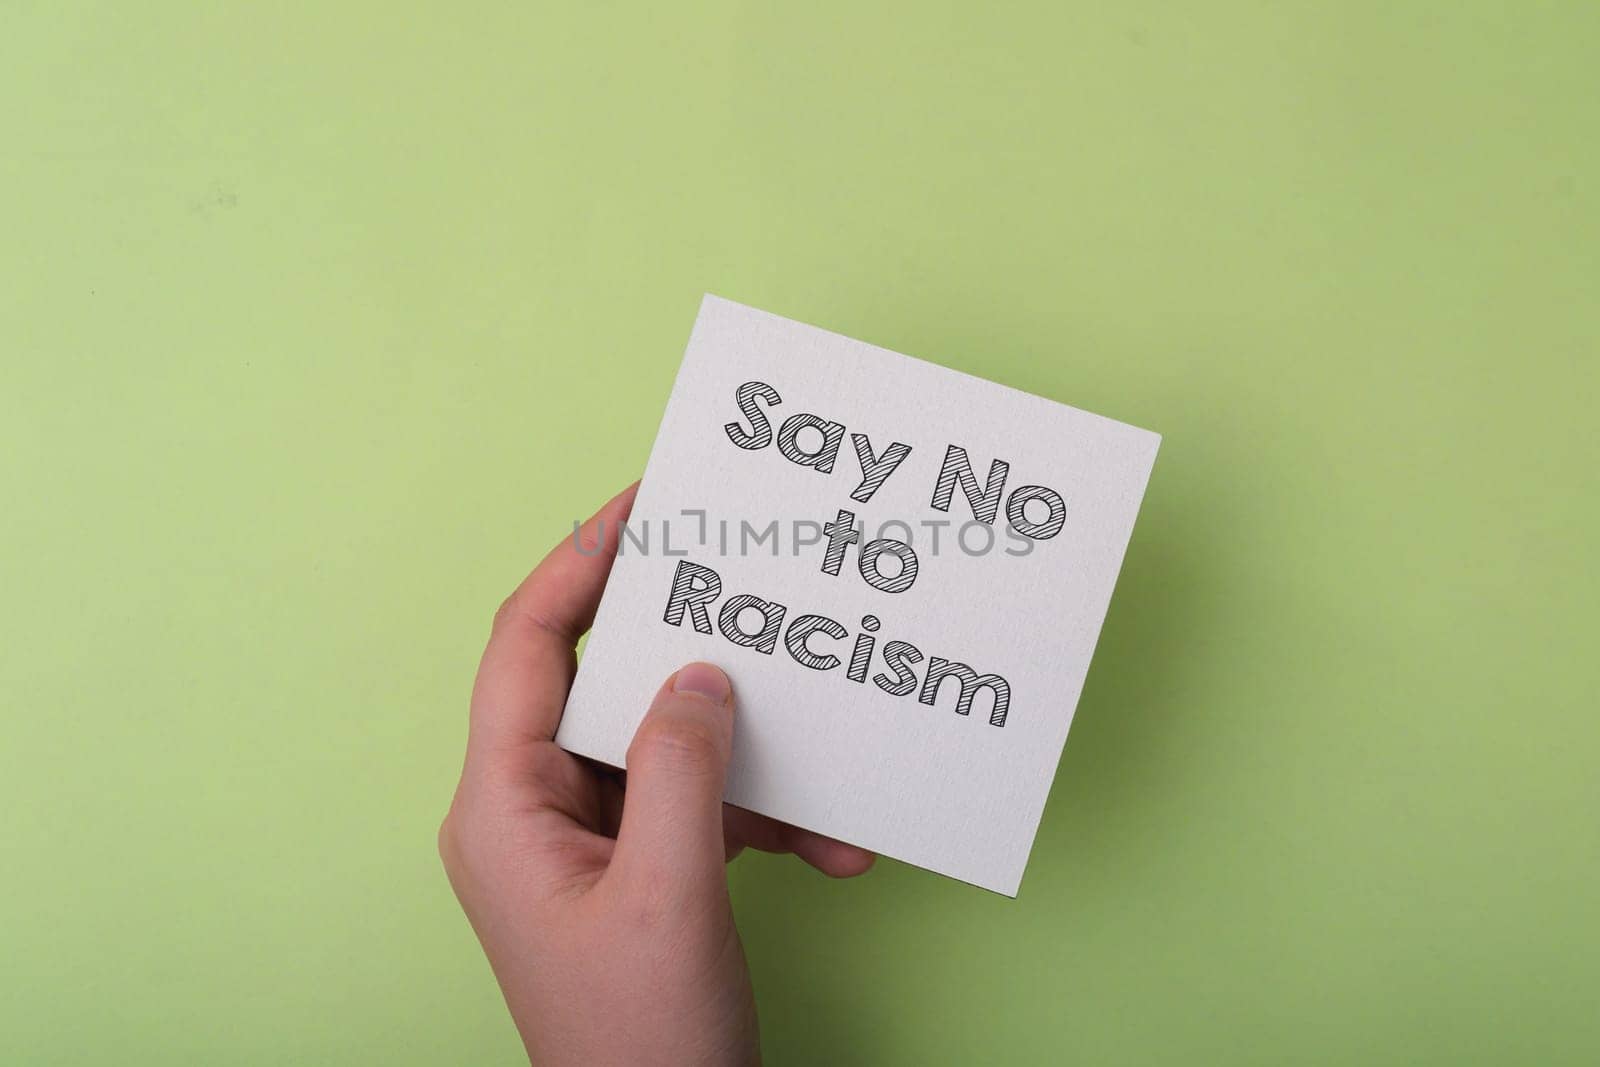 A hand holding a piece of paper that says Say No to Racism. The image conveys a strong message against racism and encourages people to take a stand against it